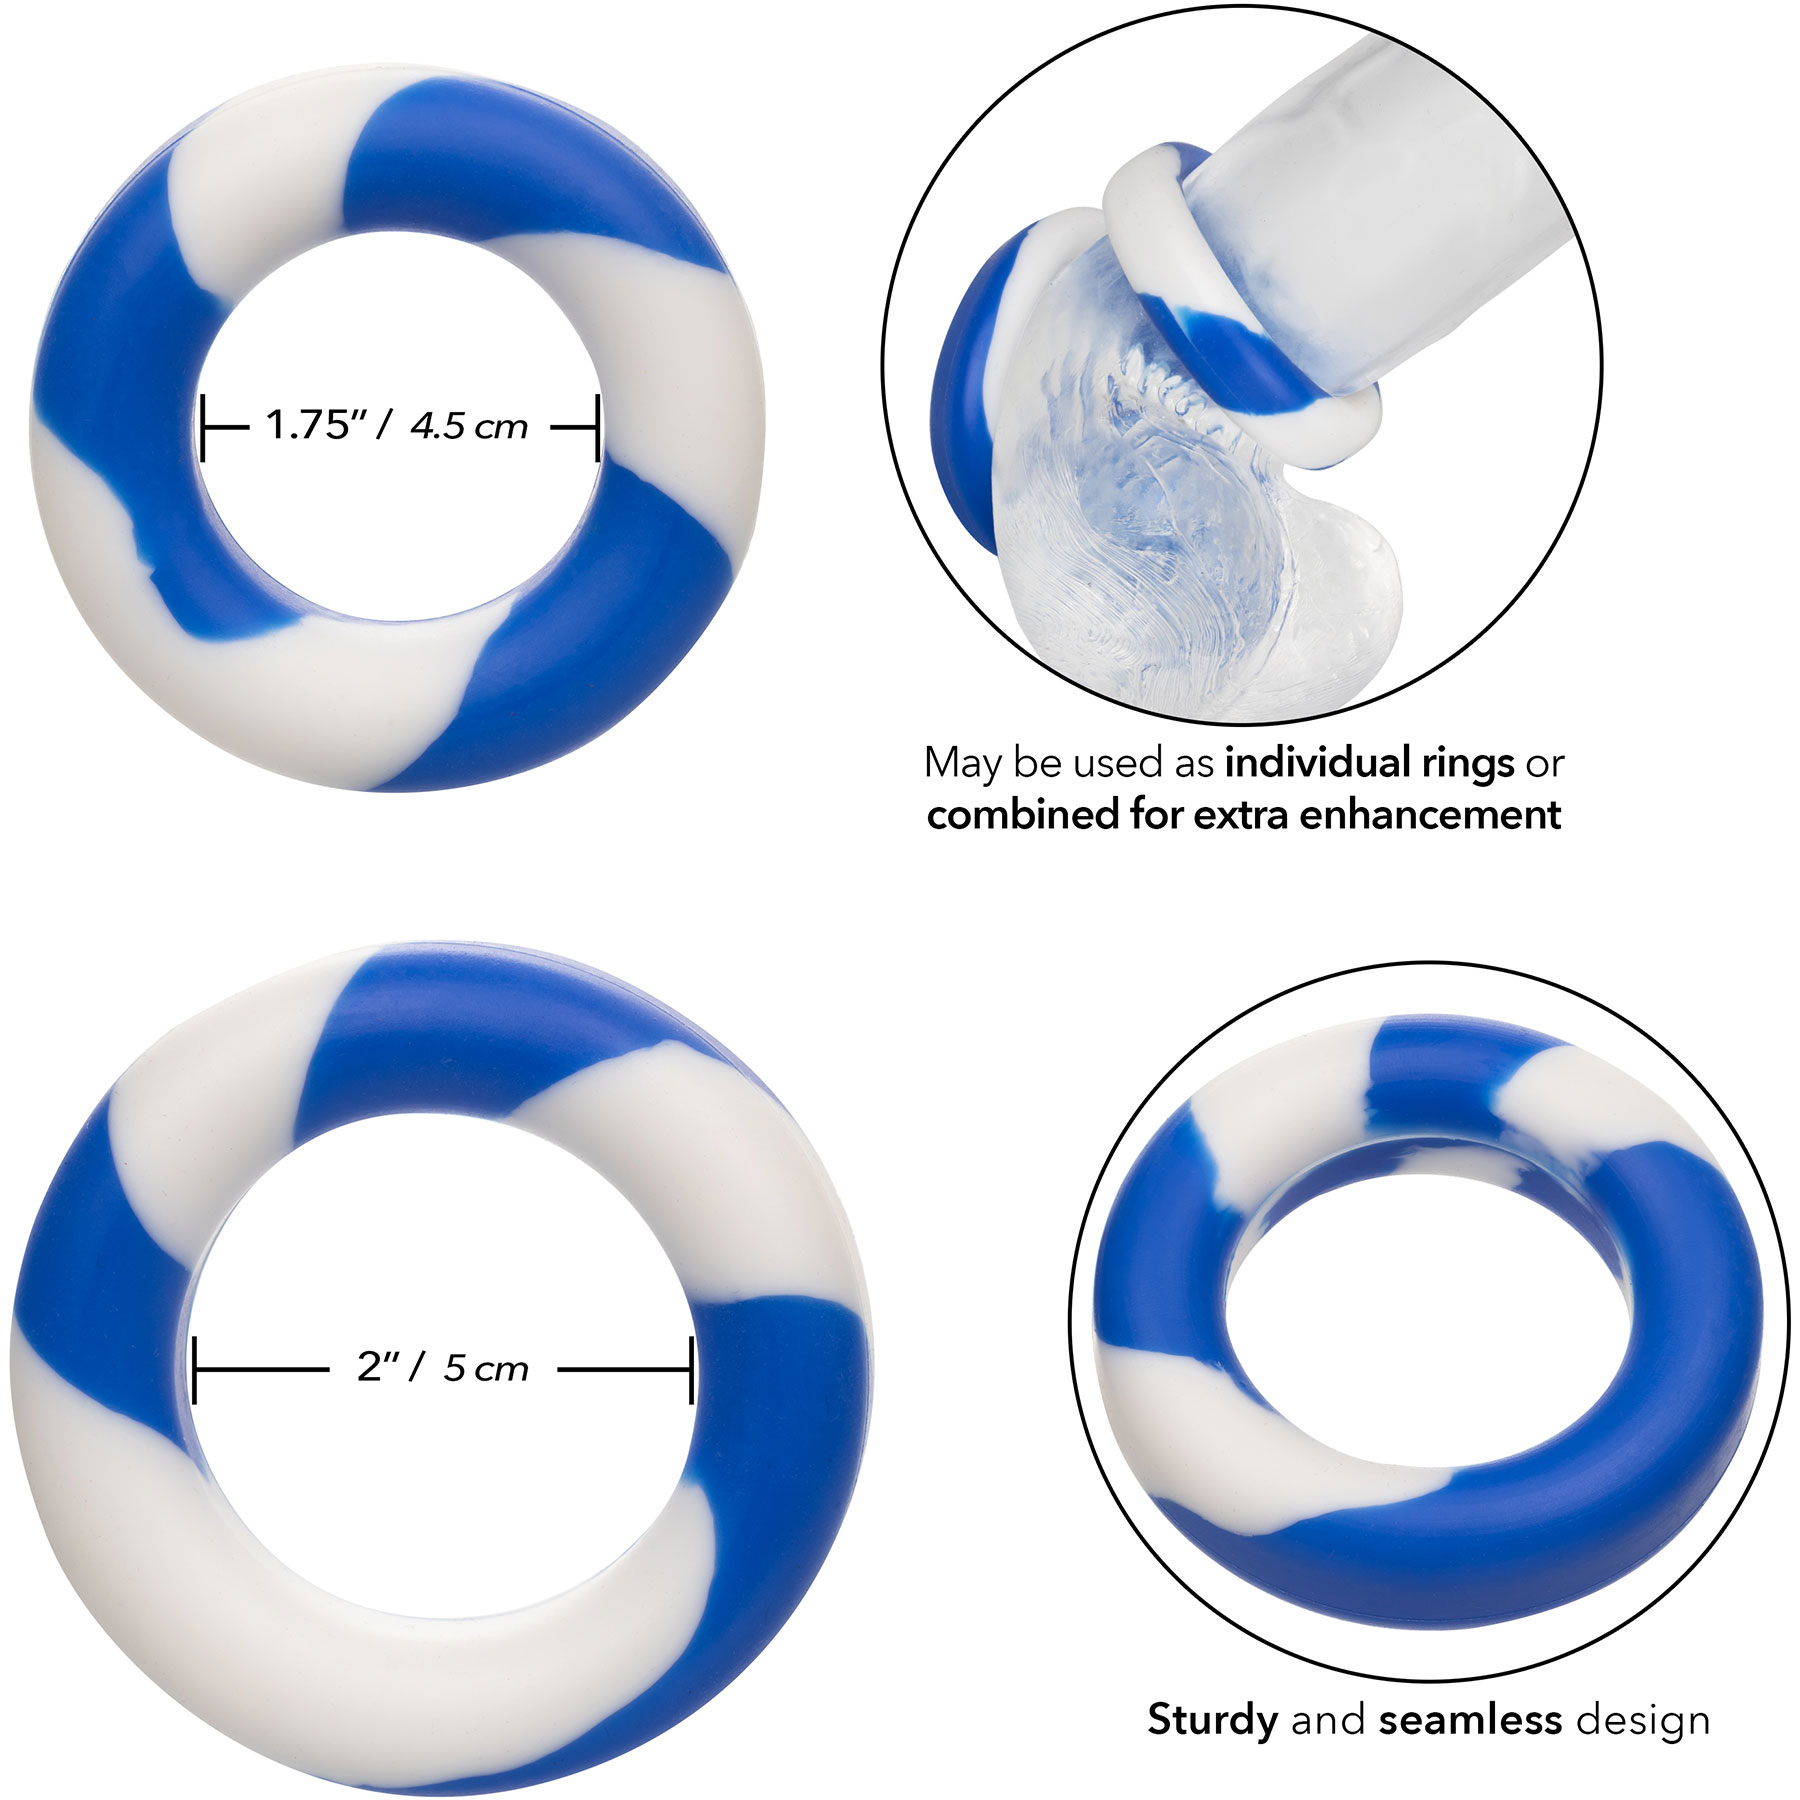 Admiral Silicone 2-Piece Stretchy Cock Ring Set - Measurements